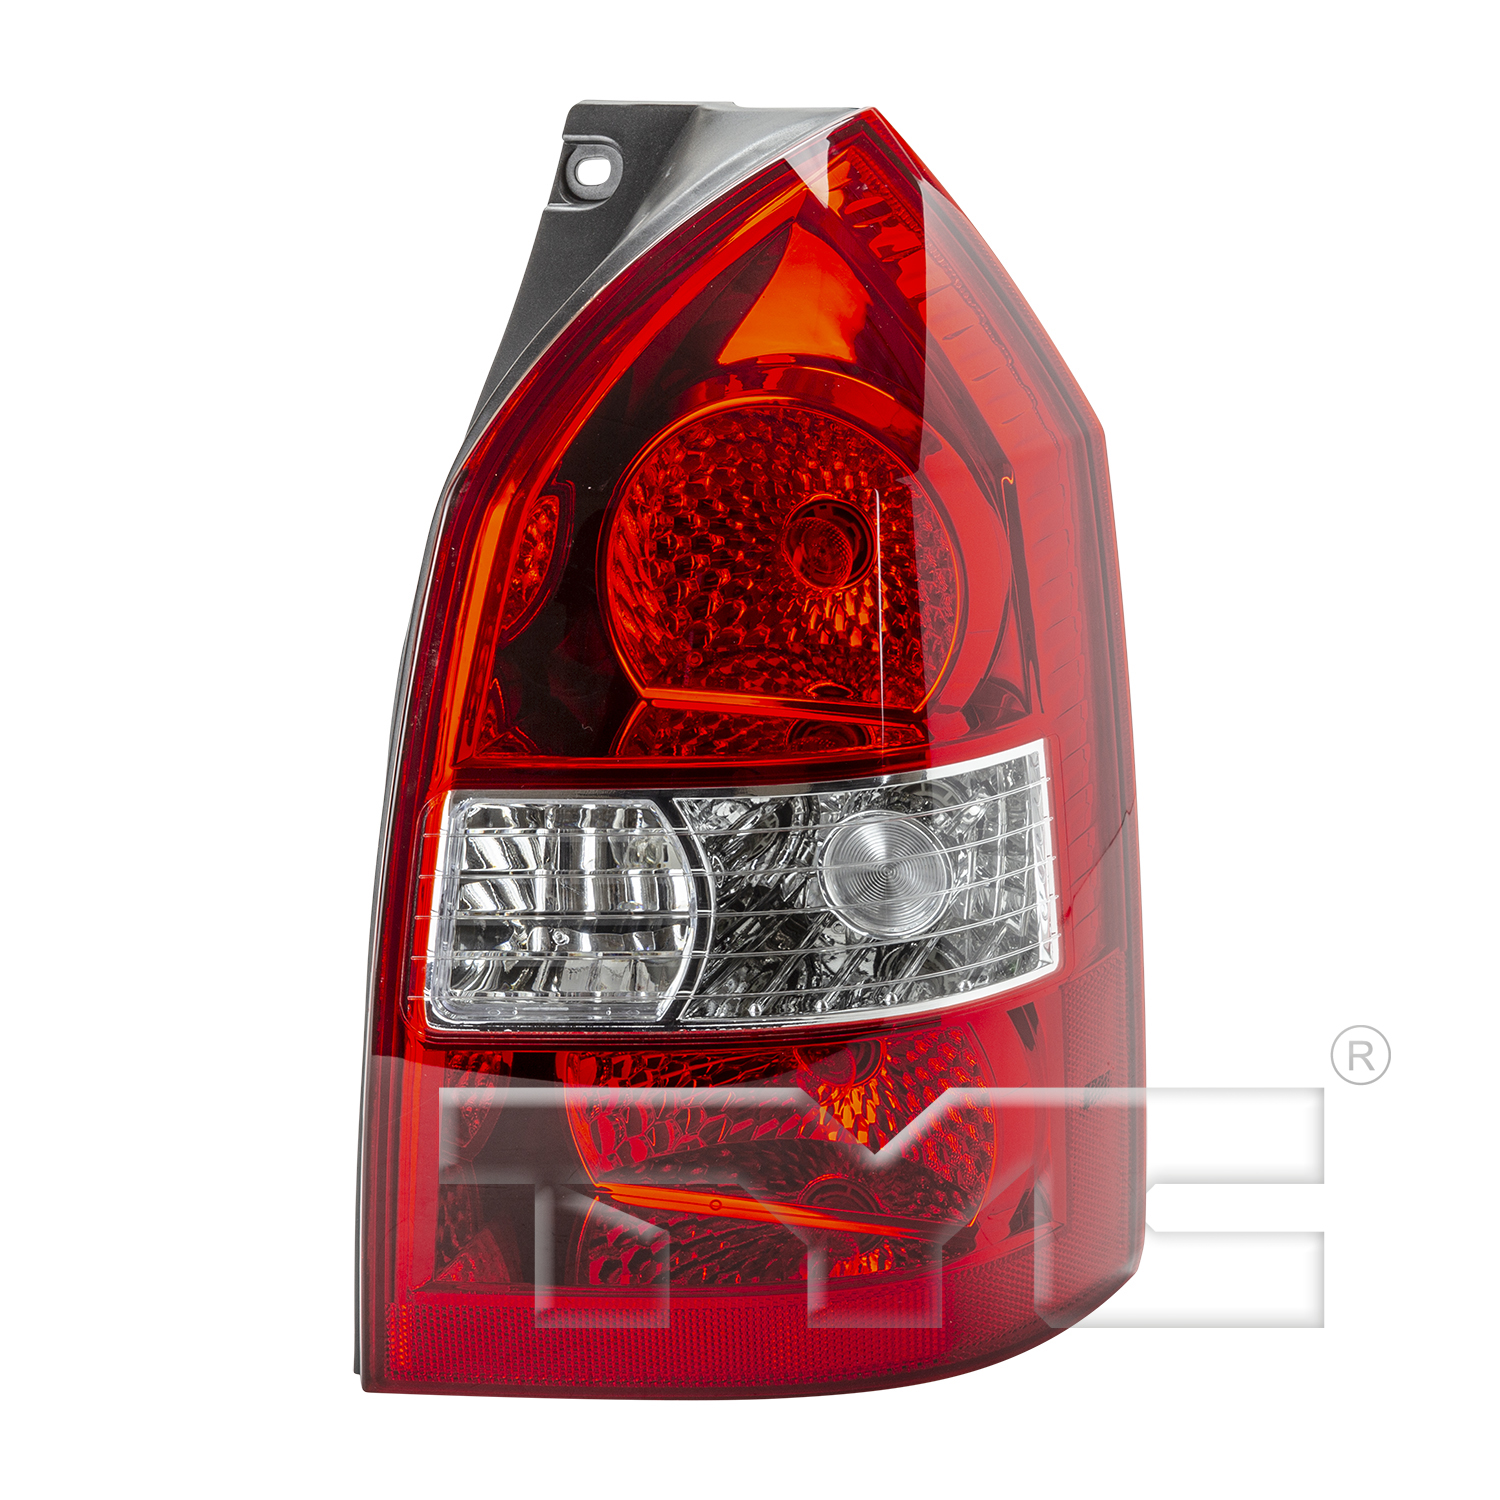 Aftermarket TAILLIGHTS for HYUNDAI - TUCSON, TUCSON,05-09,RT Taillamp assy